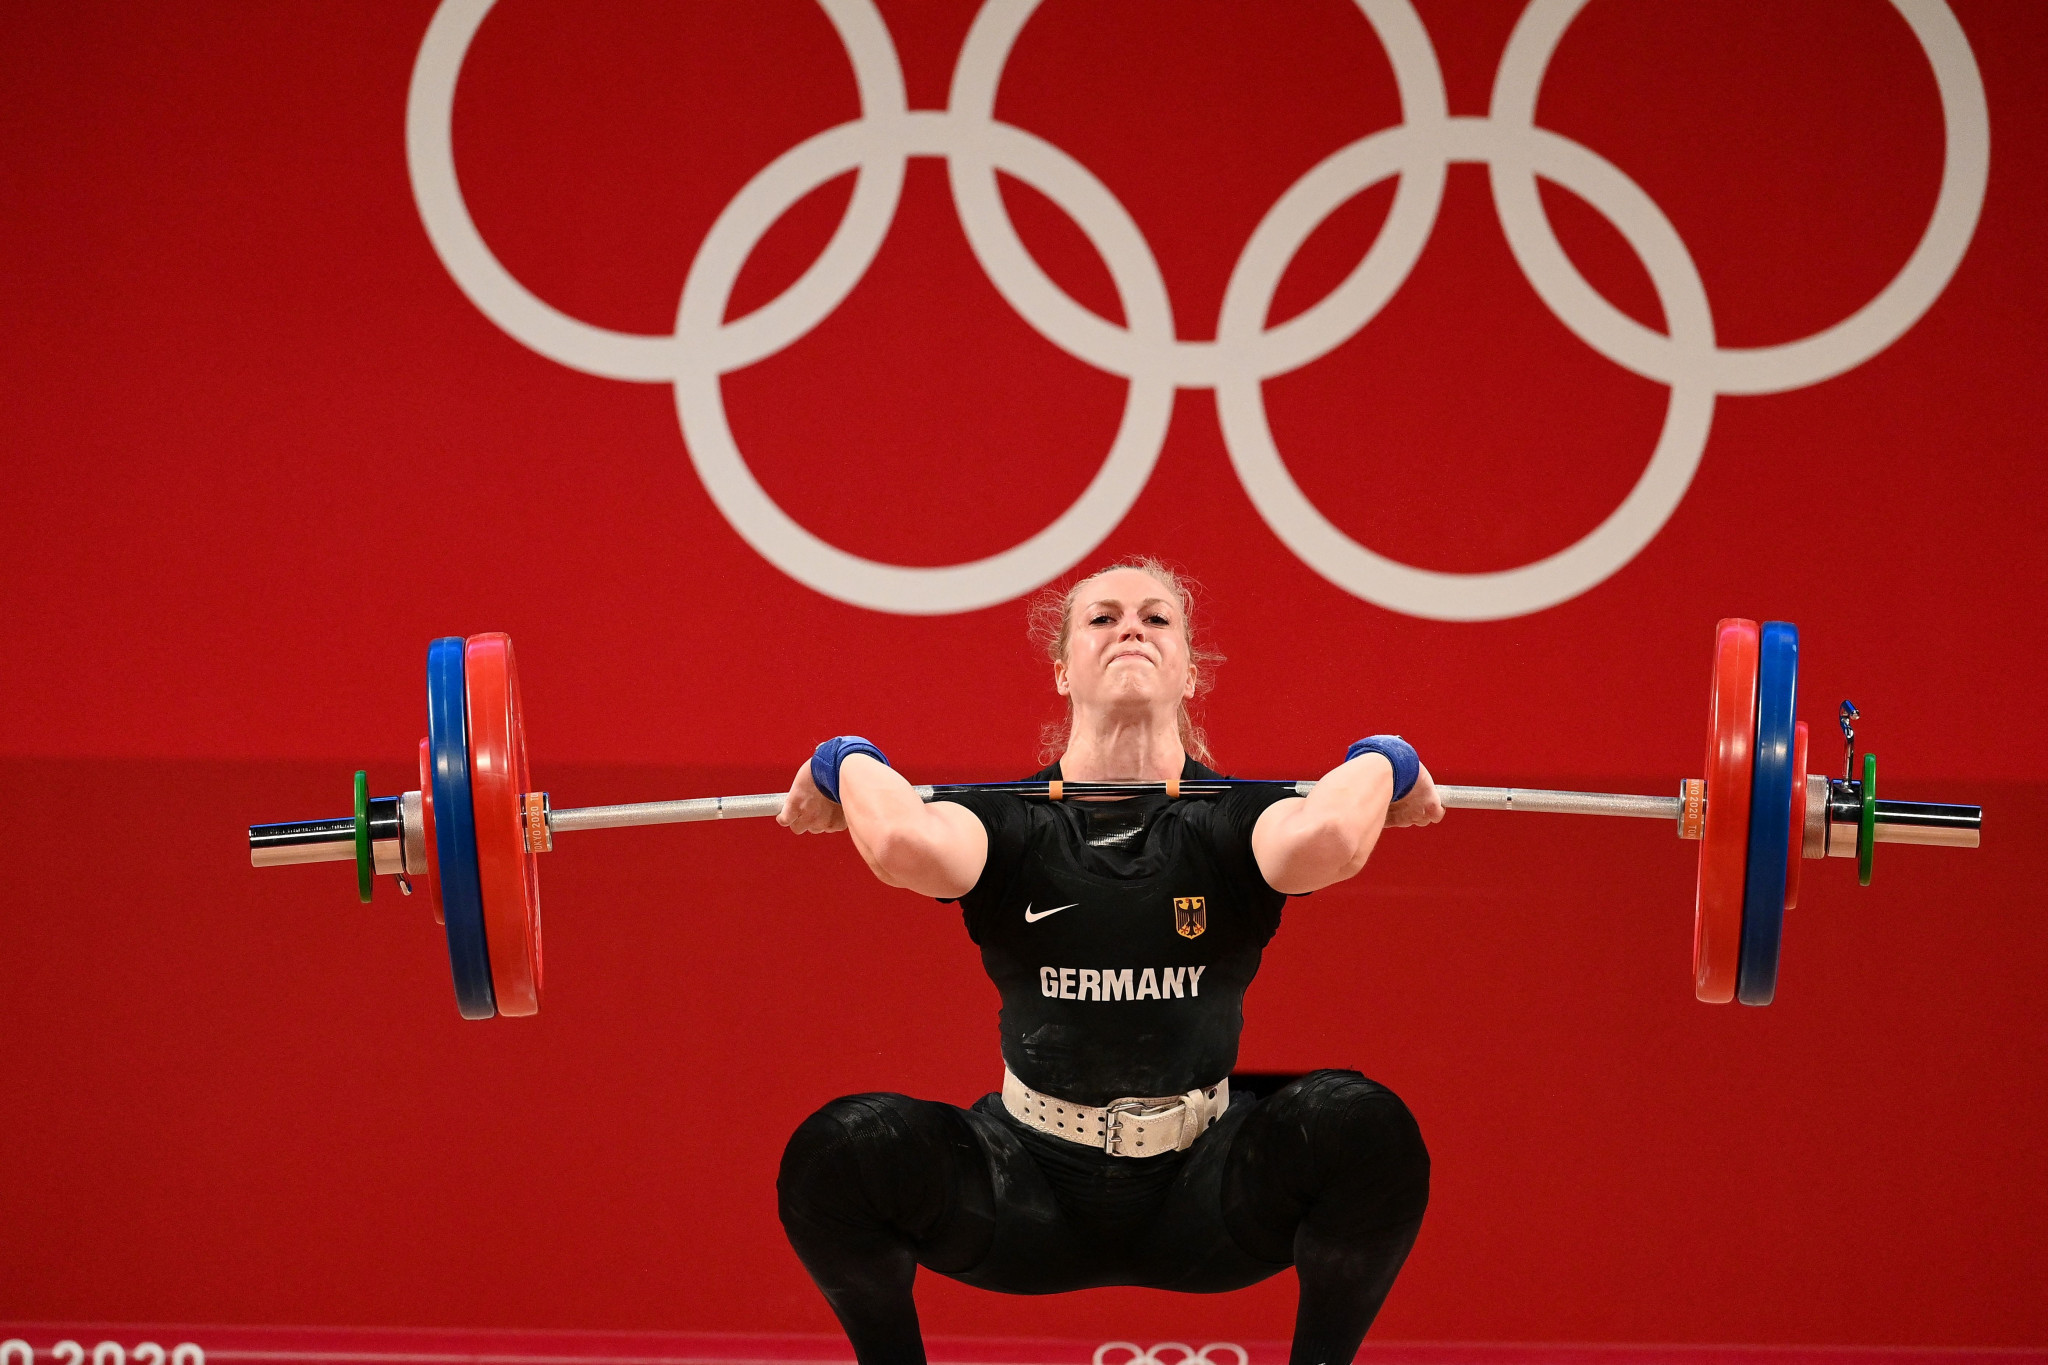 Lisa Marie Schweizer of Germany, who competed at Tokyo 2020, is aiming to qualify in the women's Bundesliga competition ©Getty Images